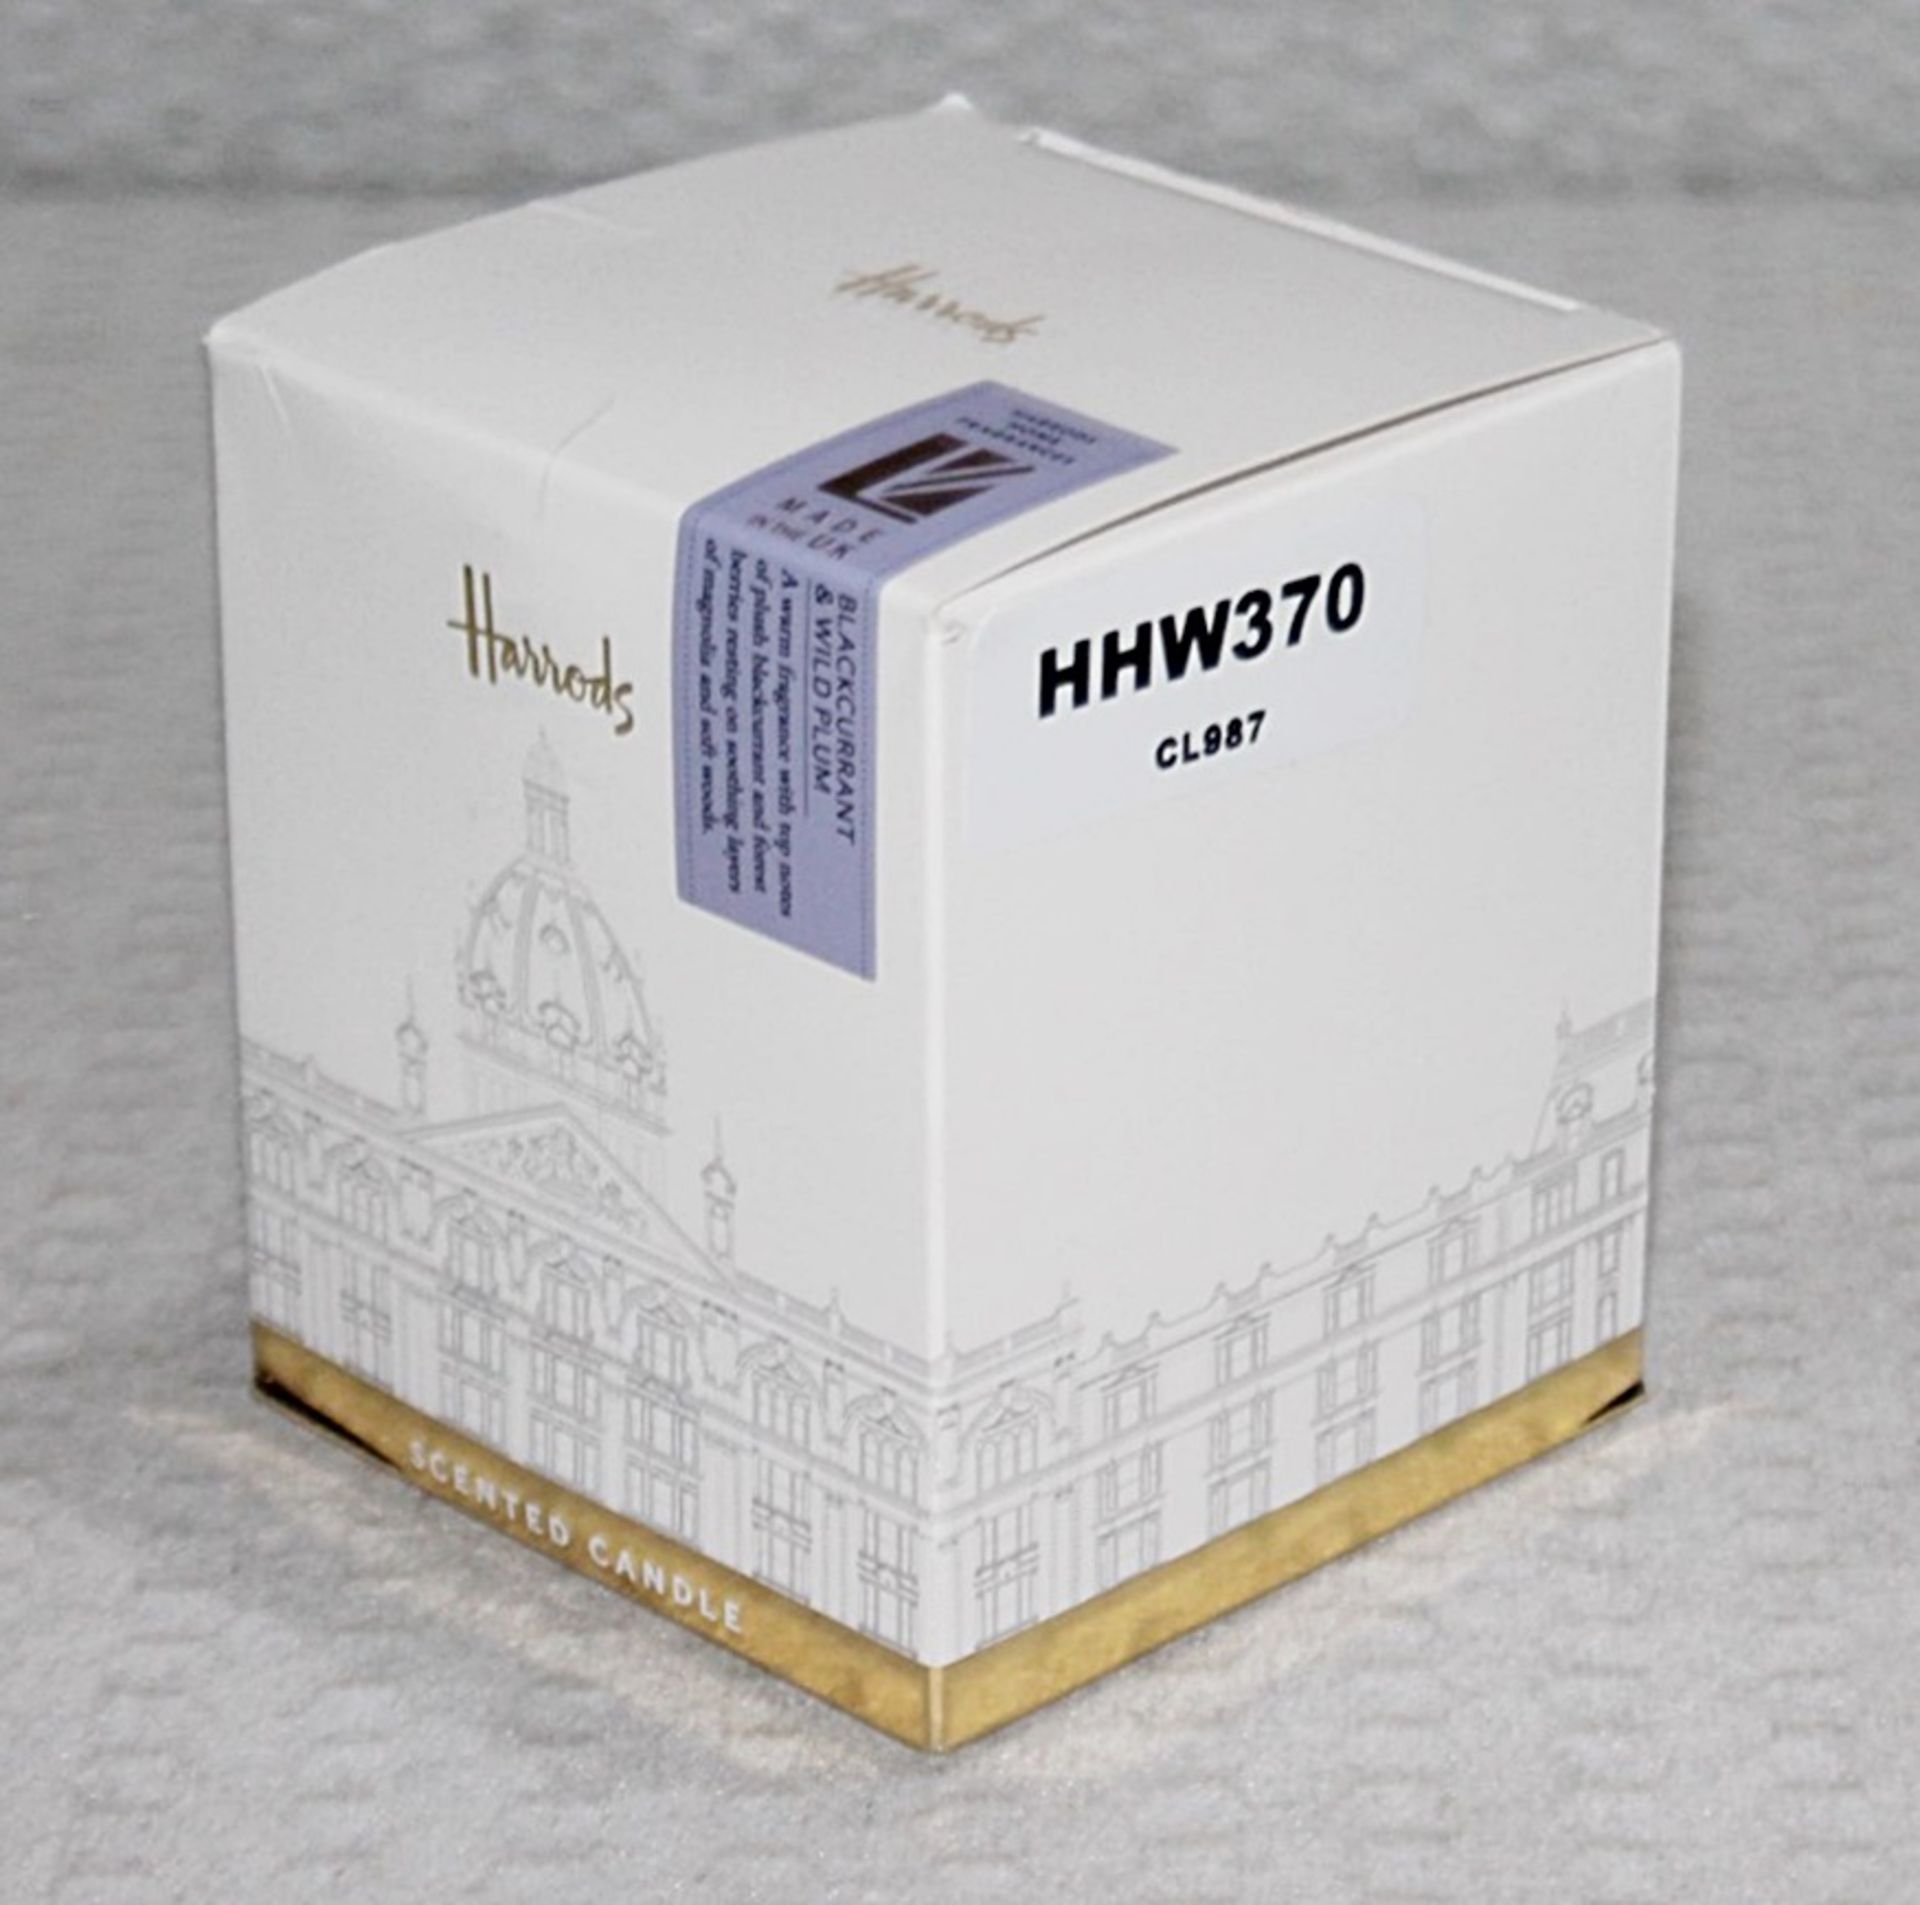 1 x HARRODS Branded Blackcurrant And Wild Plum Candle (230g) - Unused Boxed Stock - Ref: HHW370/ - Image 2 of 5